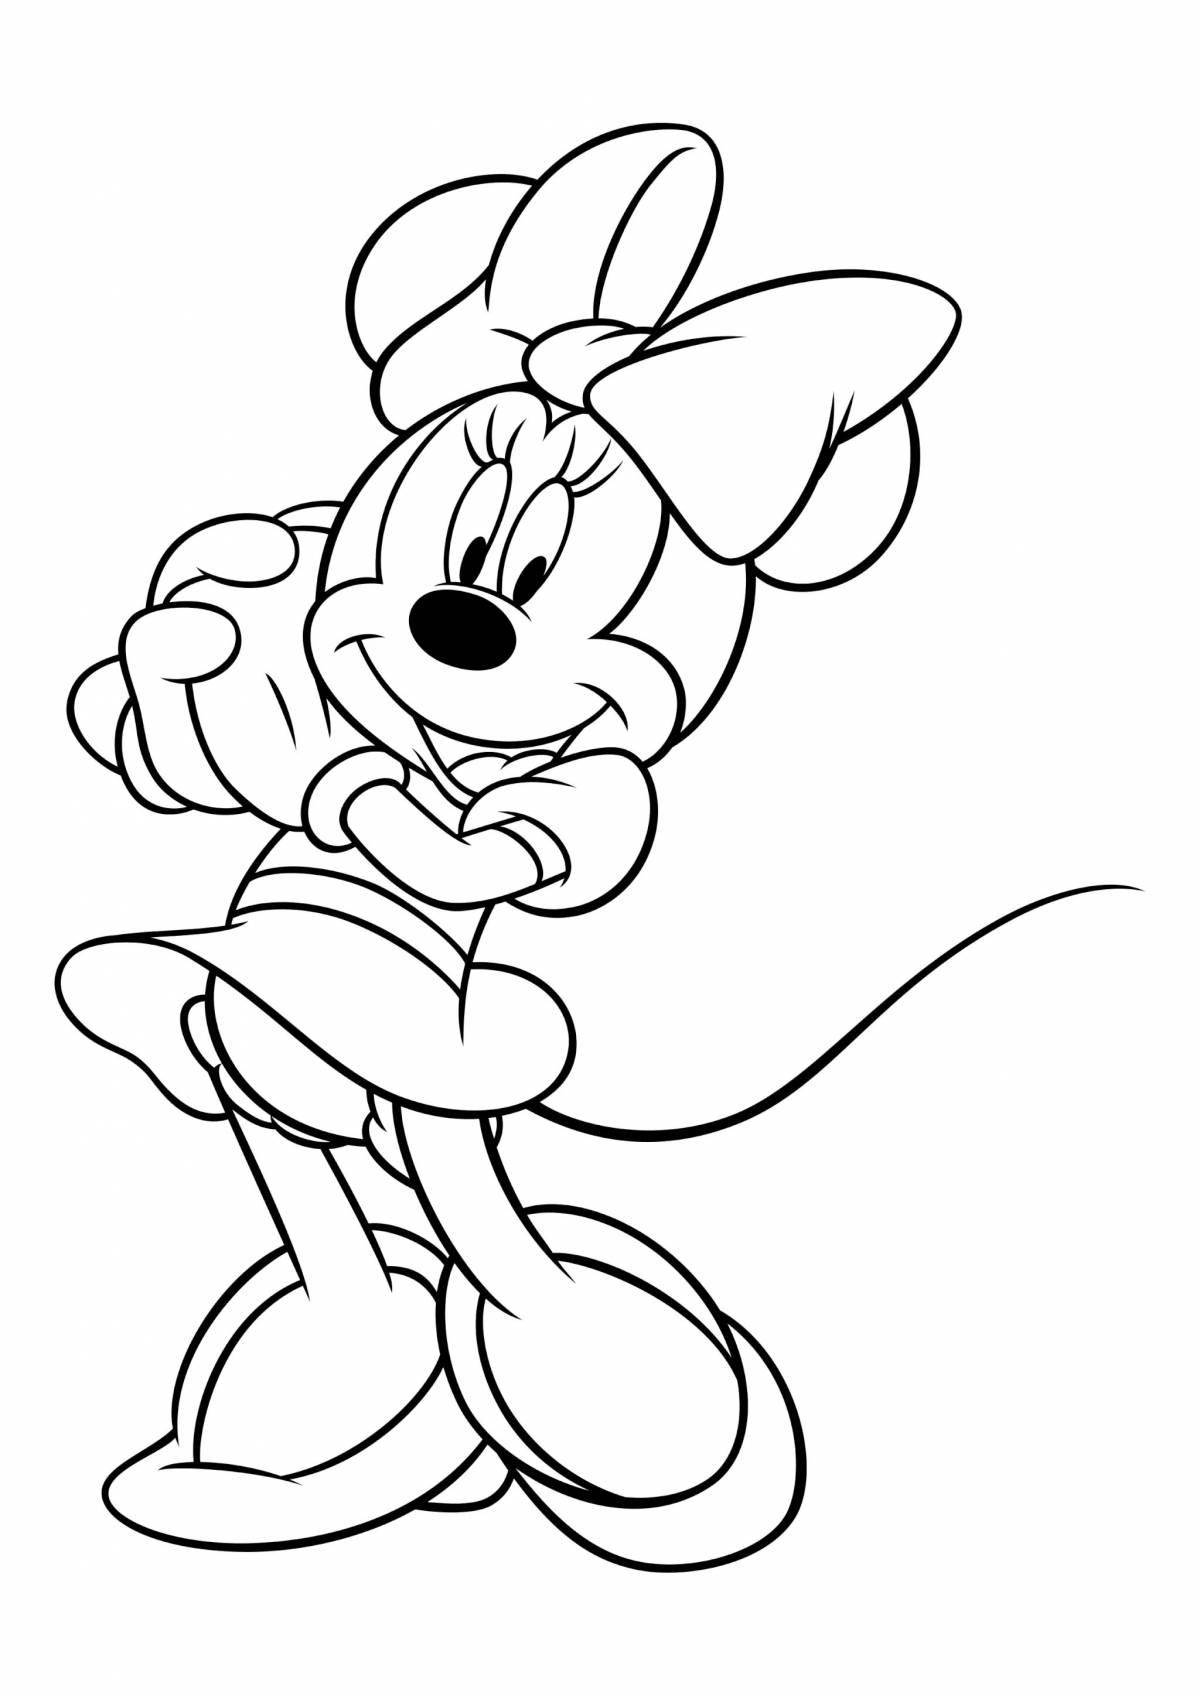 Great minnie mouse coloring book for kids